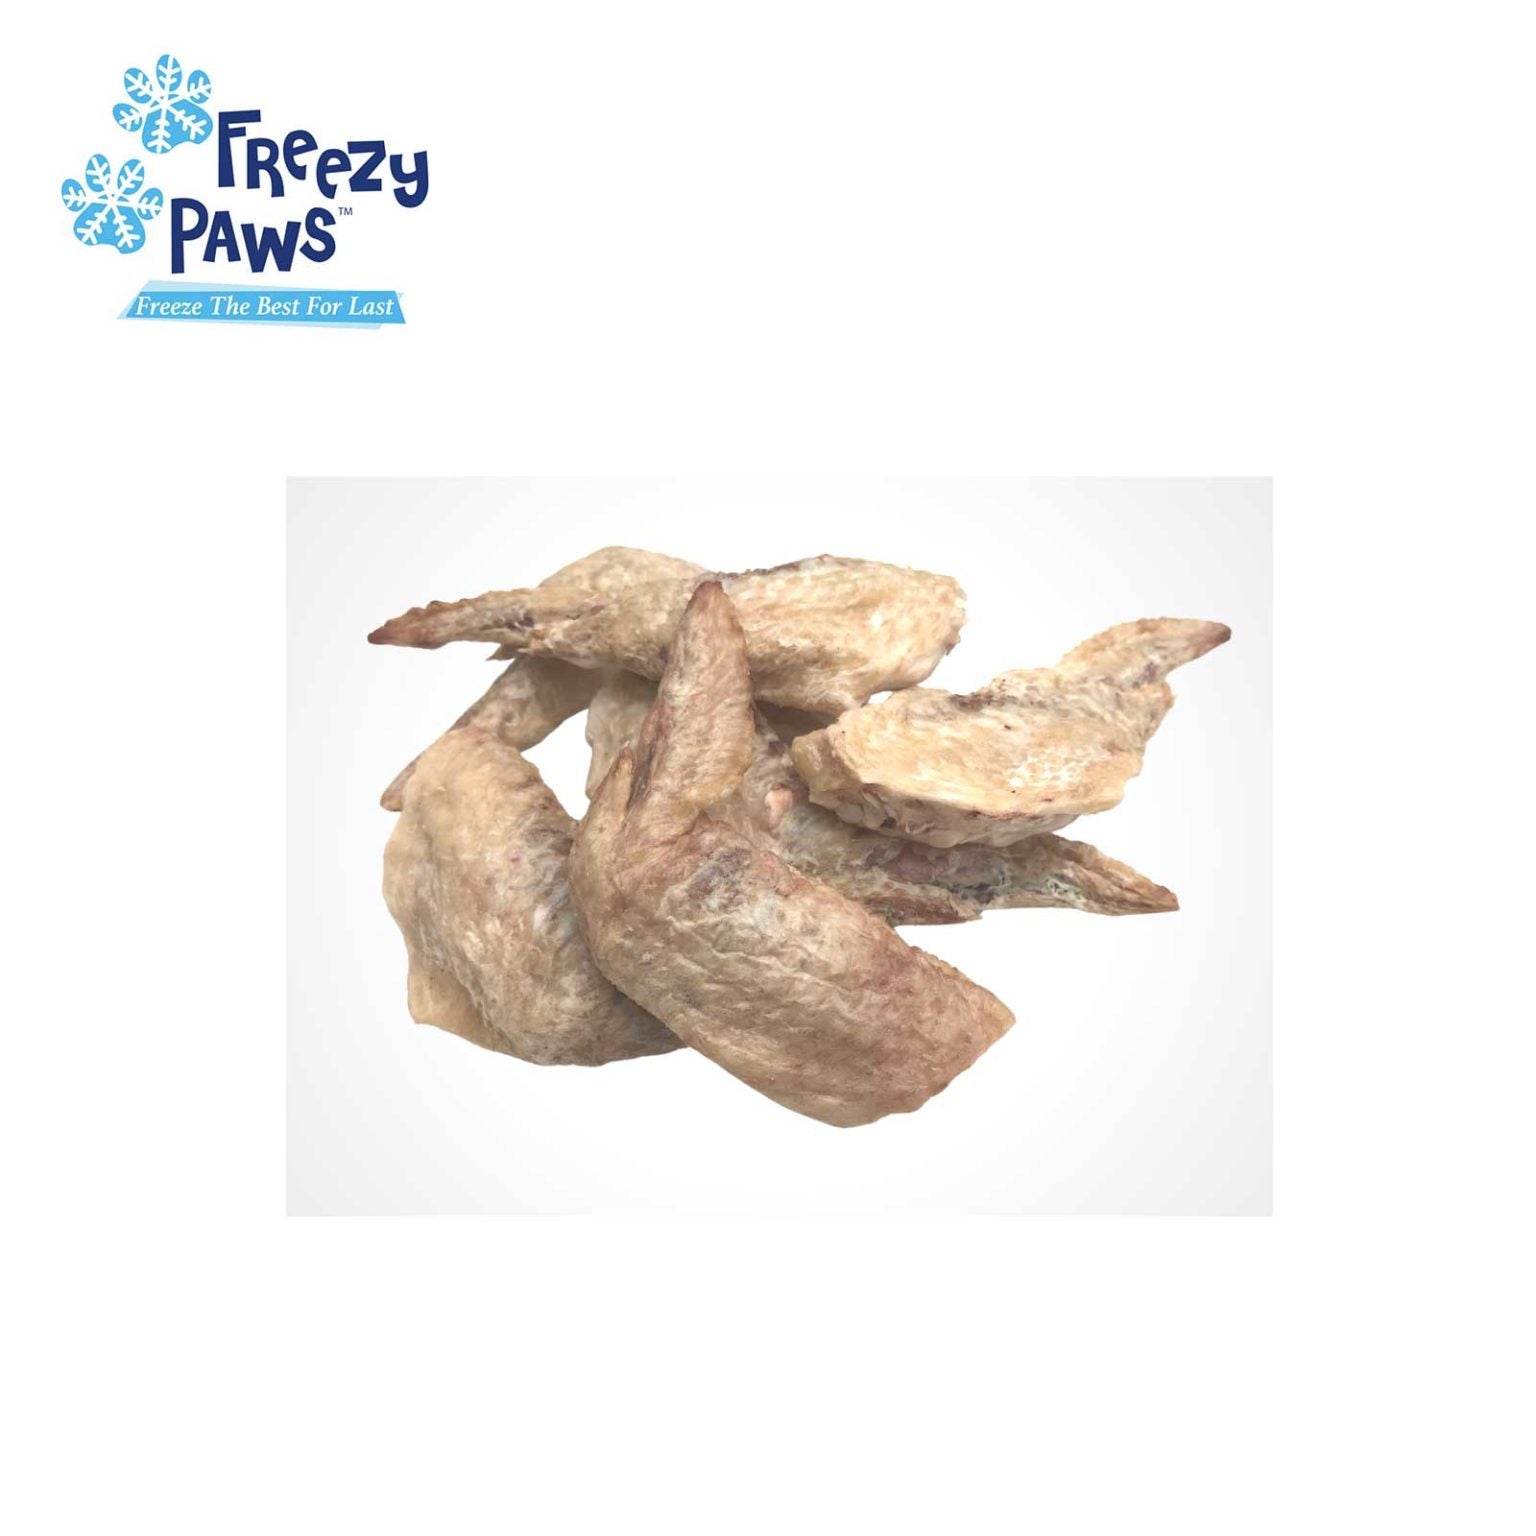 Freezy Paws Freeze-Dried Chicken Wing Raw Treats for Pet Cat Dog 100G - ADS Pet Store